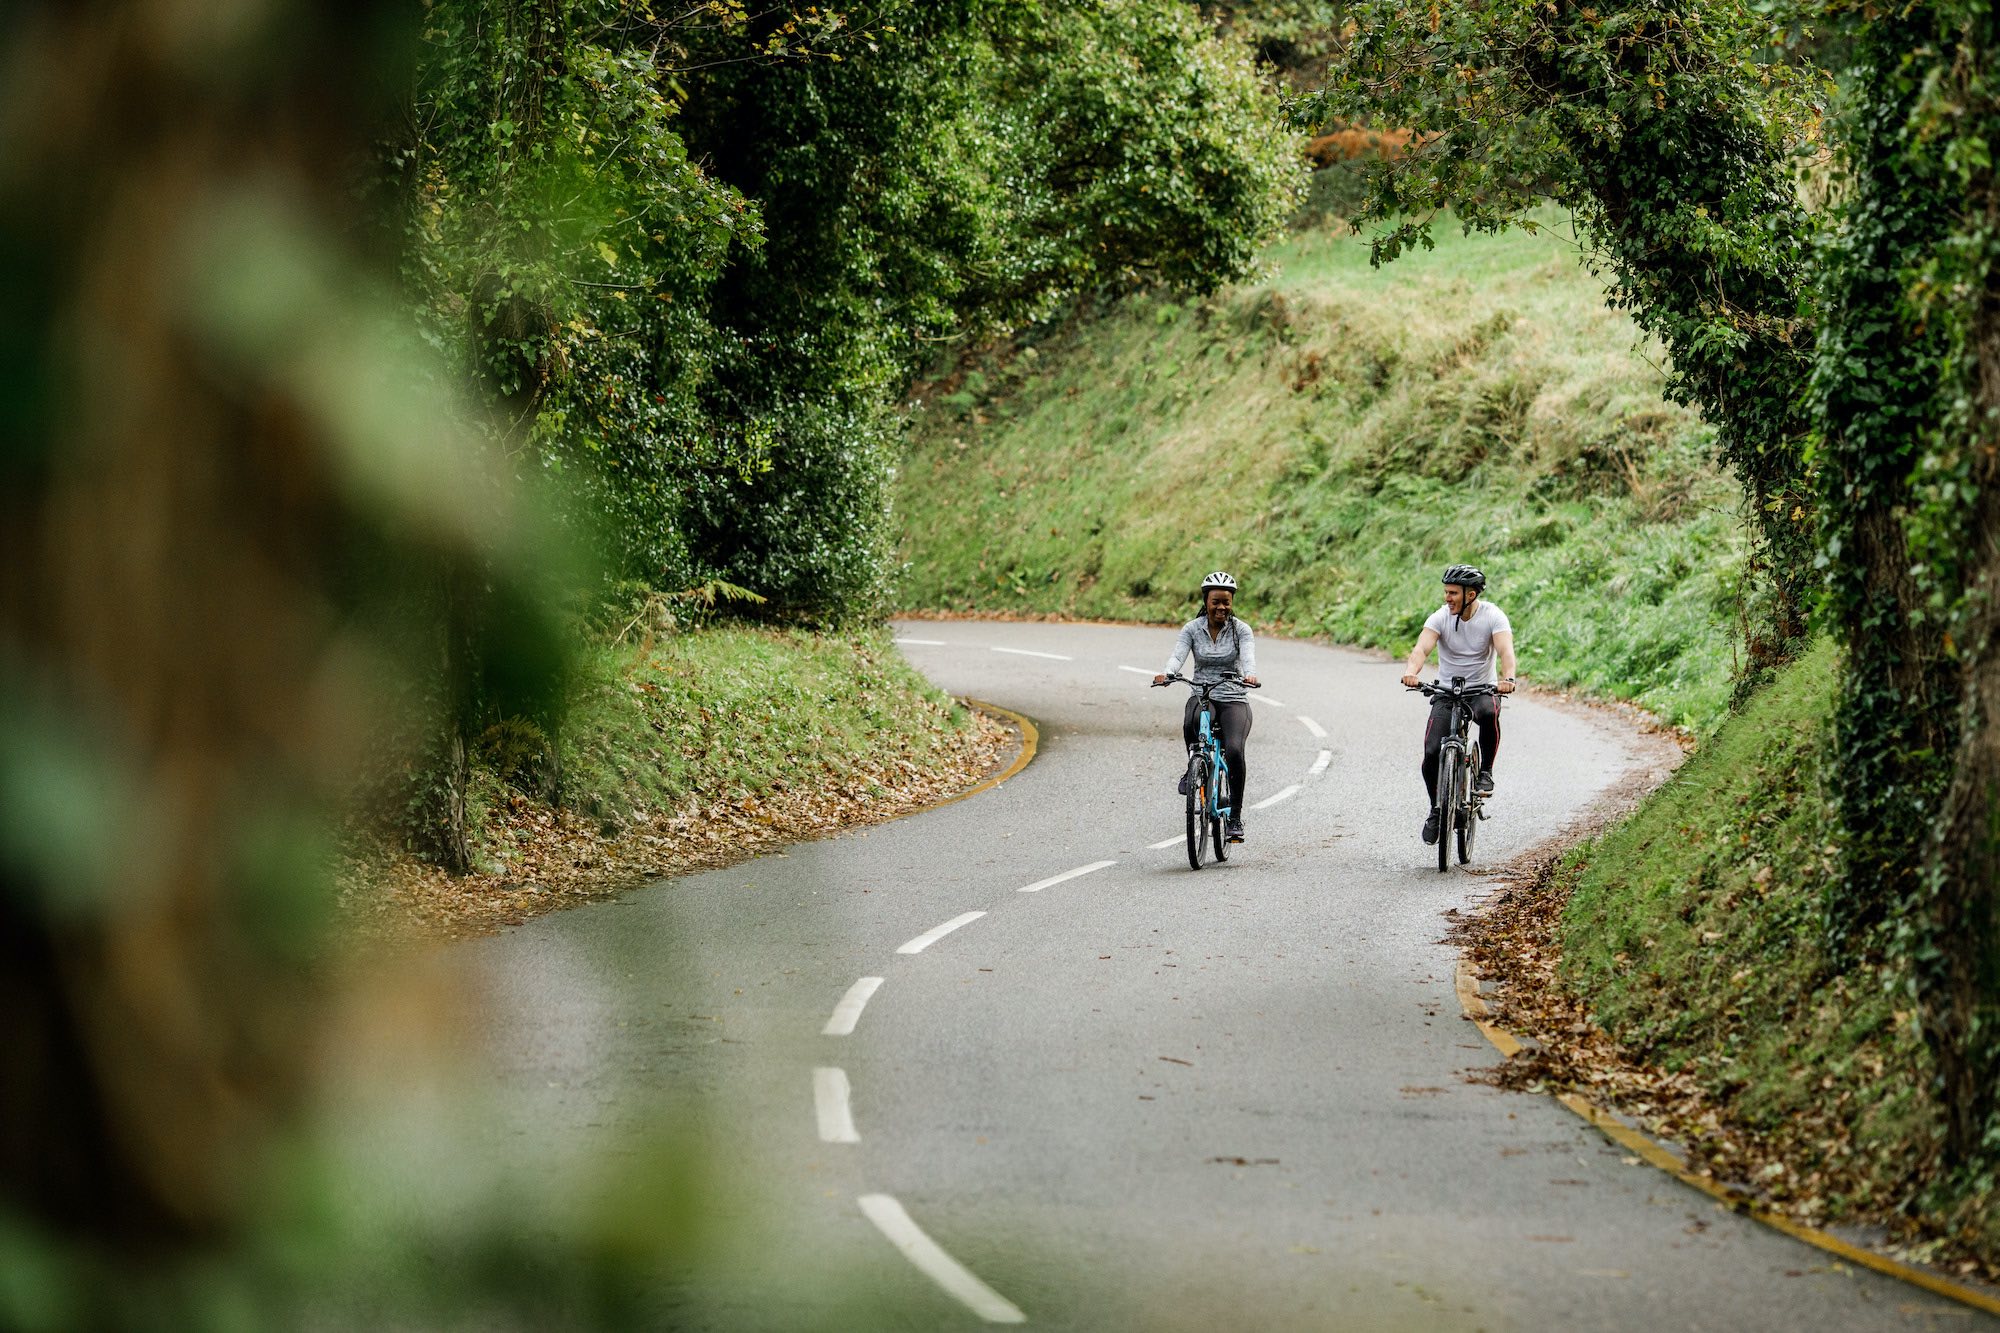 Two people ride electric bikes on quiet country road